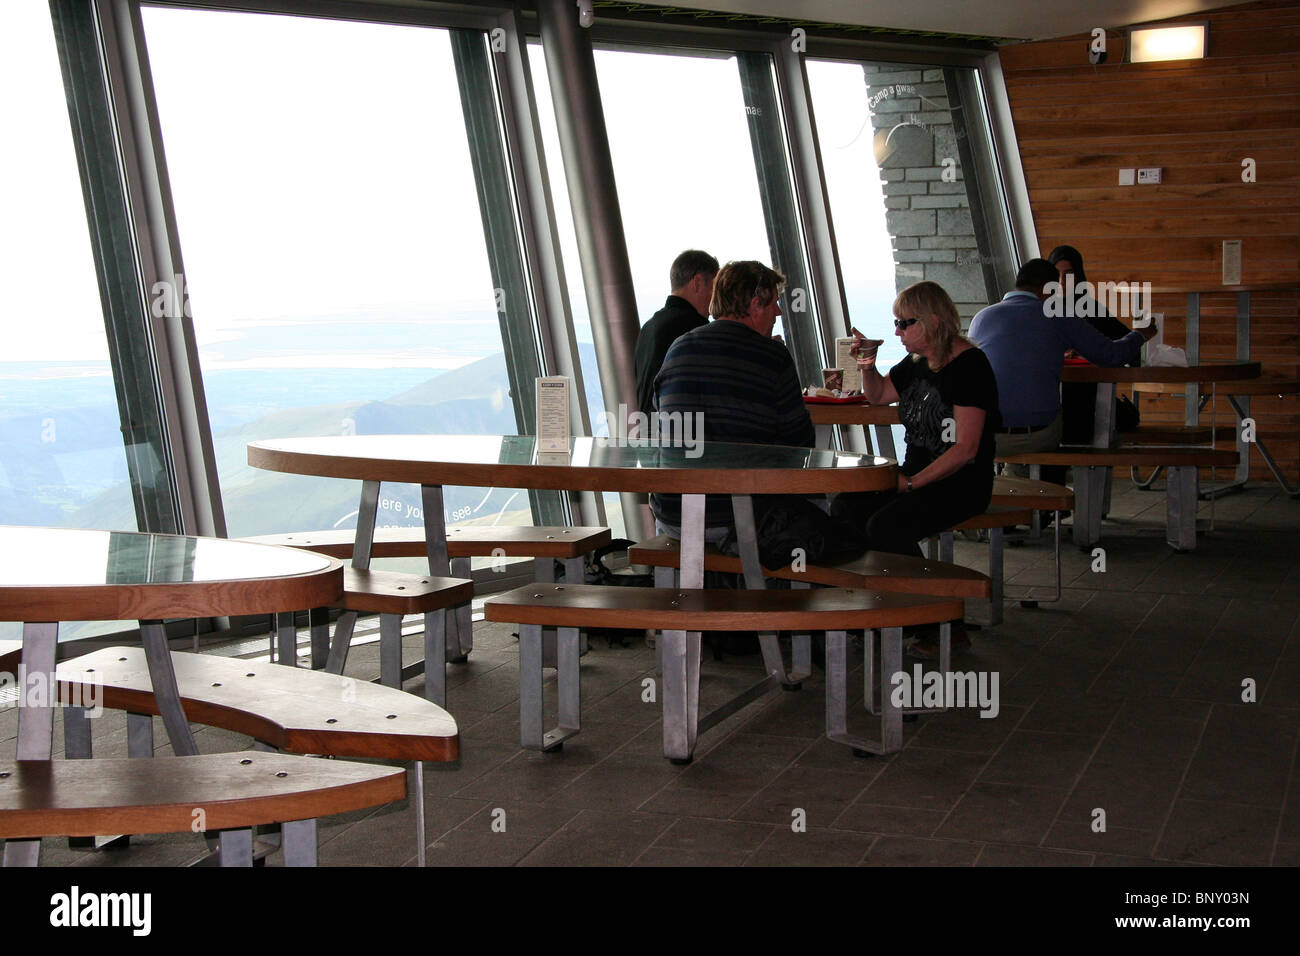 People drinking at Mount Snowdon summit cafe, Snowdonia National Park, North Wales, UK Stock Photo